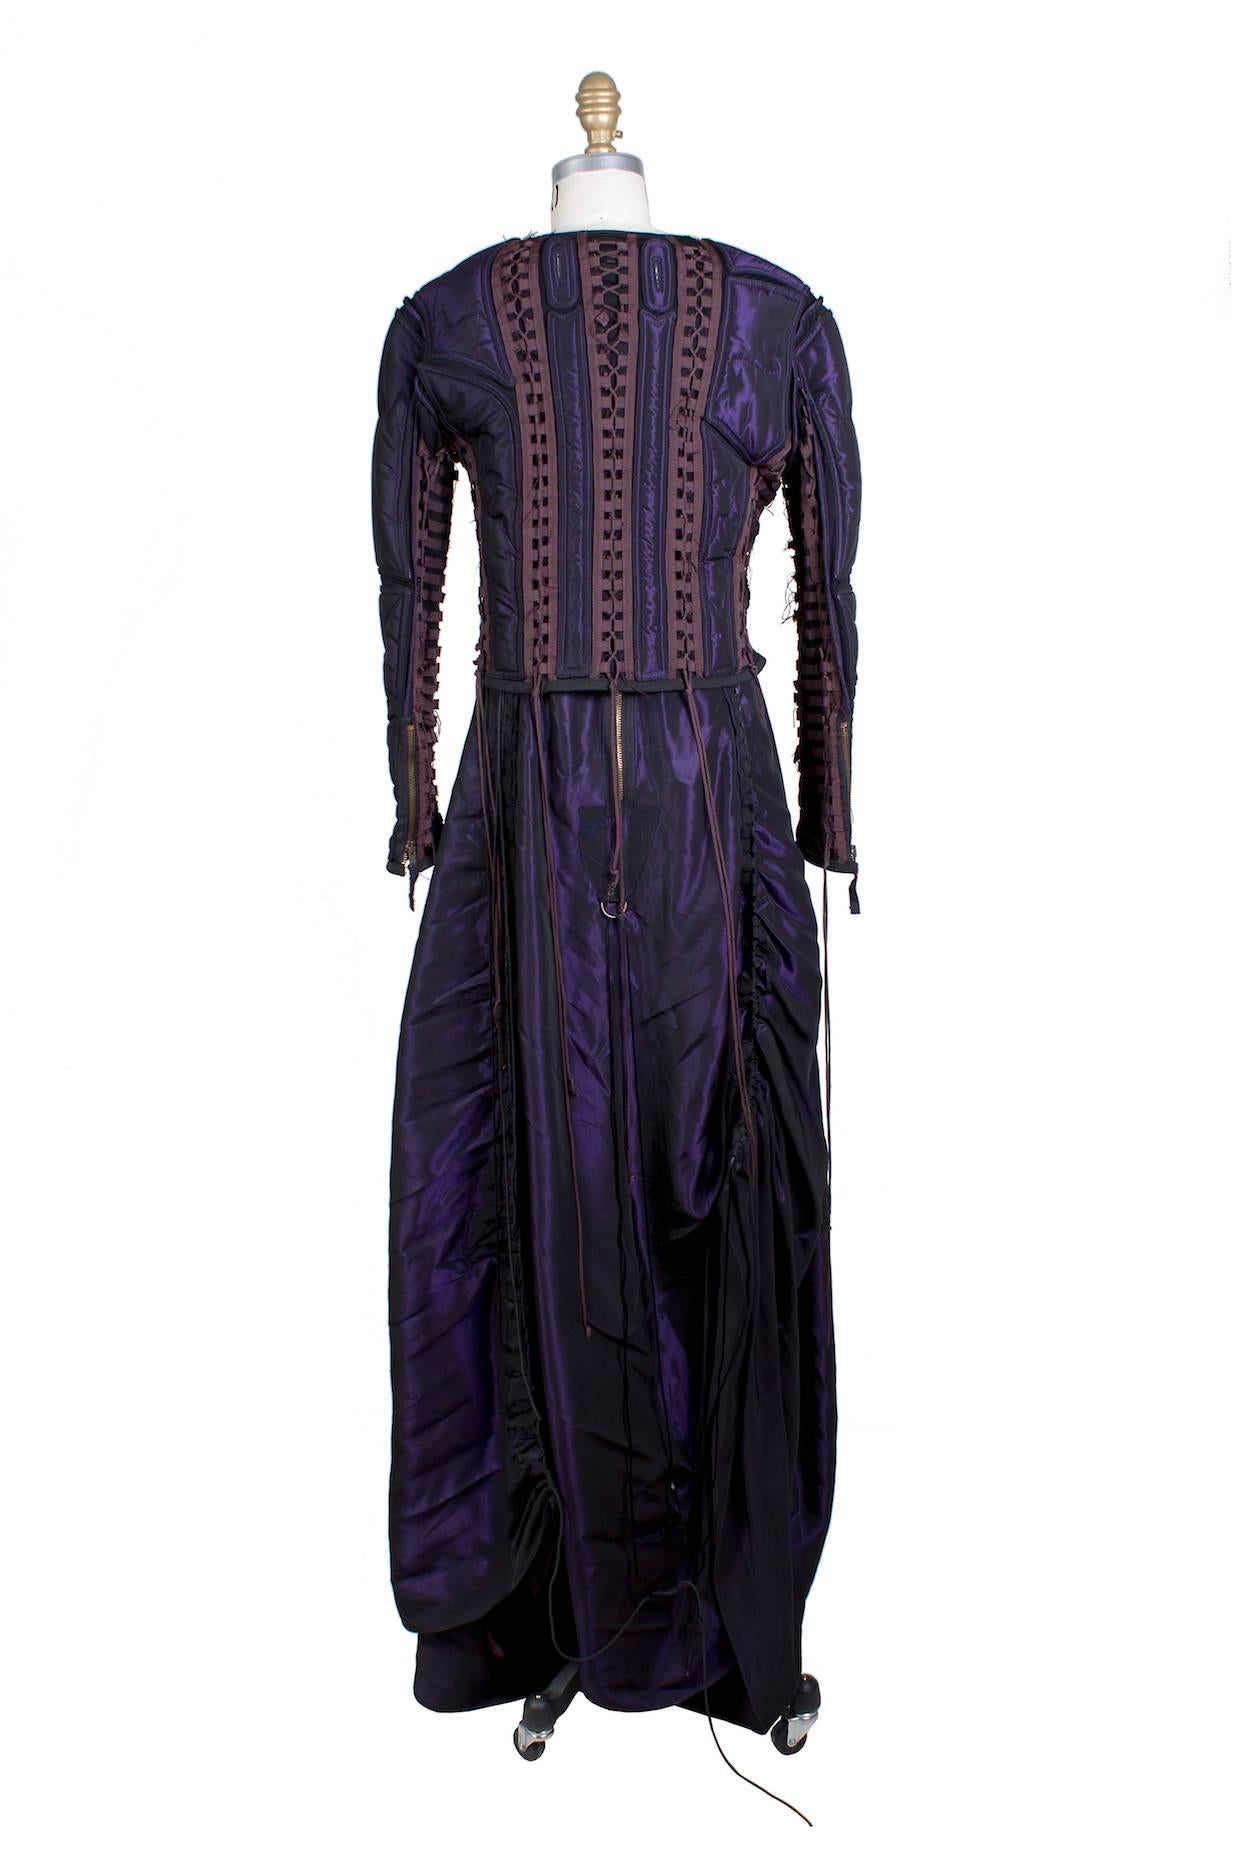 This is a matching gown and jacket by Jean Paul Gaultier c. 1990s.  It's made from a purple/black taffeta and features woven nylon lacing details similar to those used in army/navy apparel and accessories.  The jacket is structured and padded